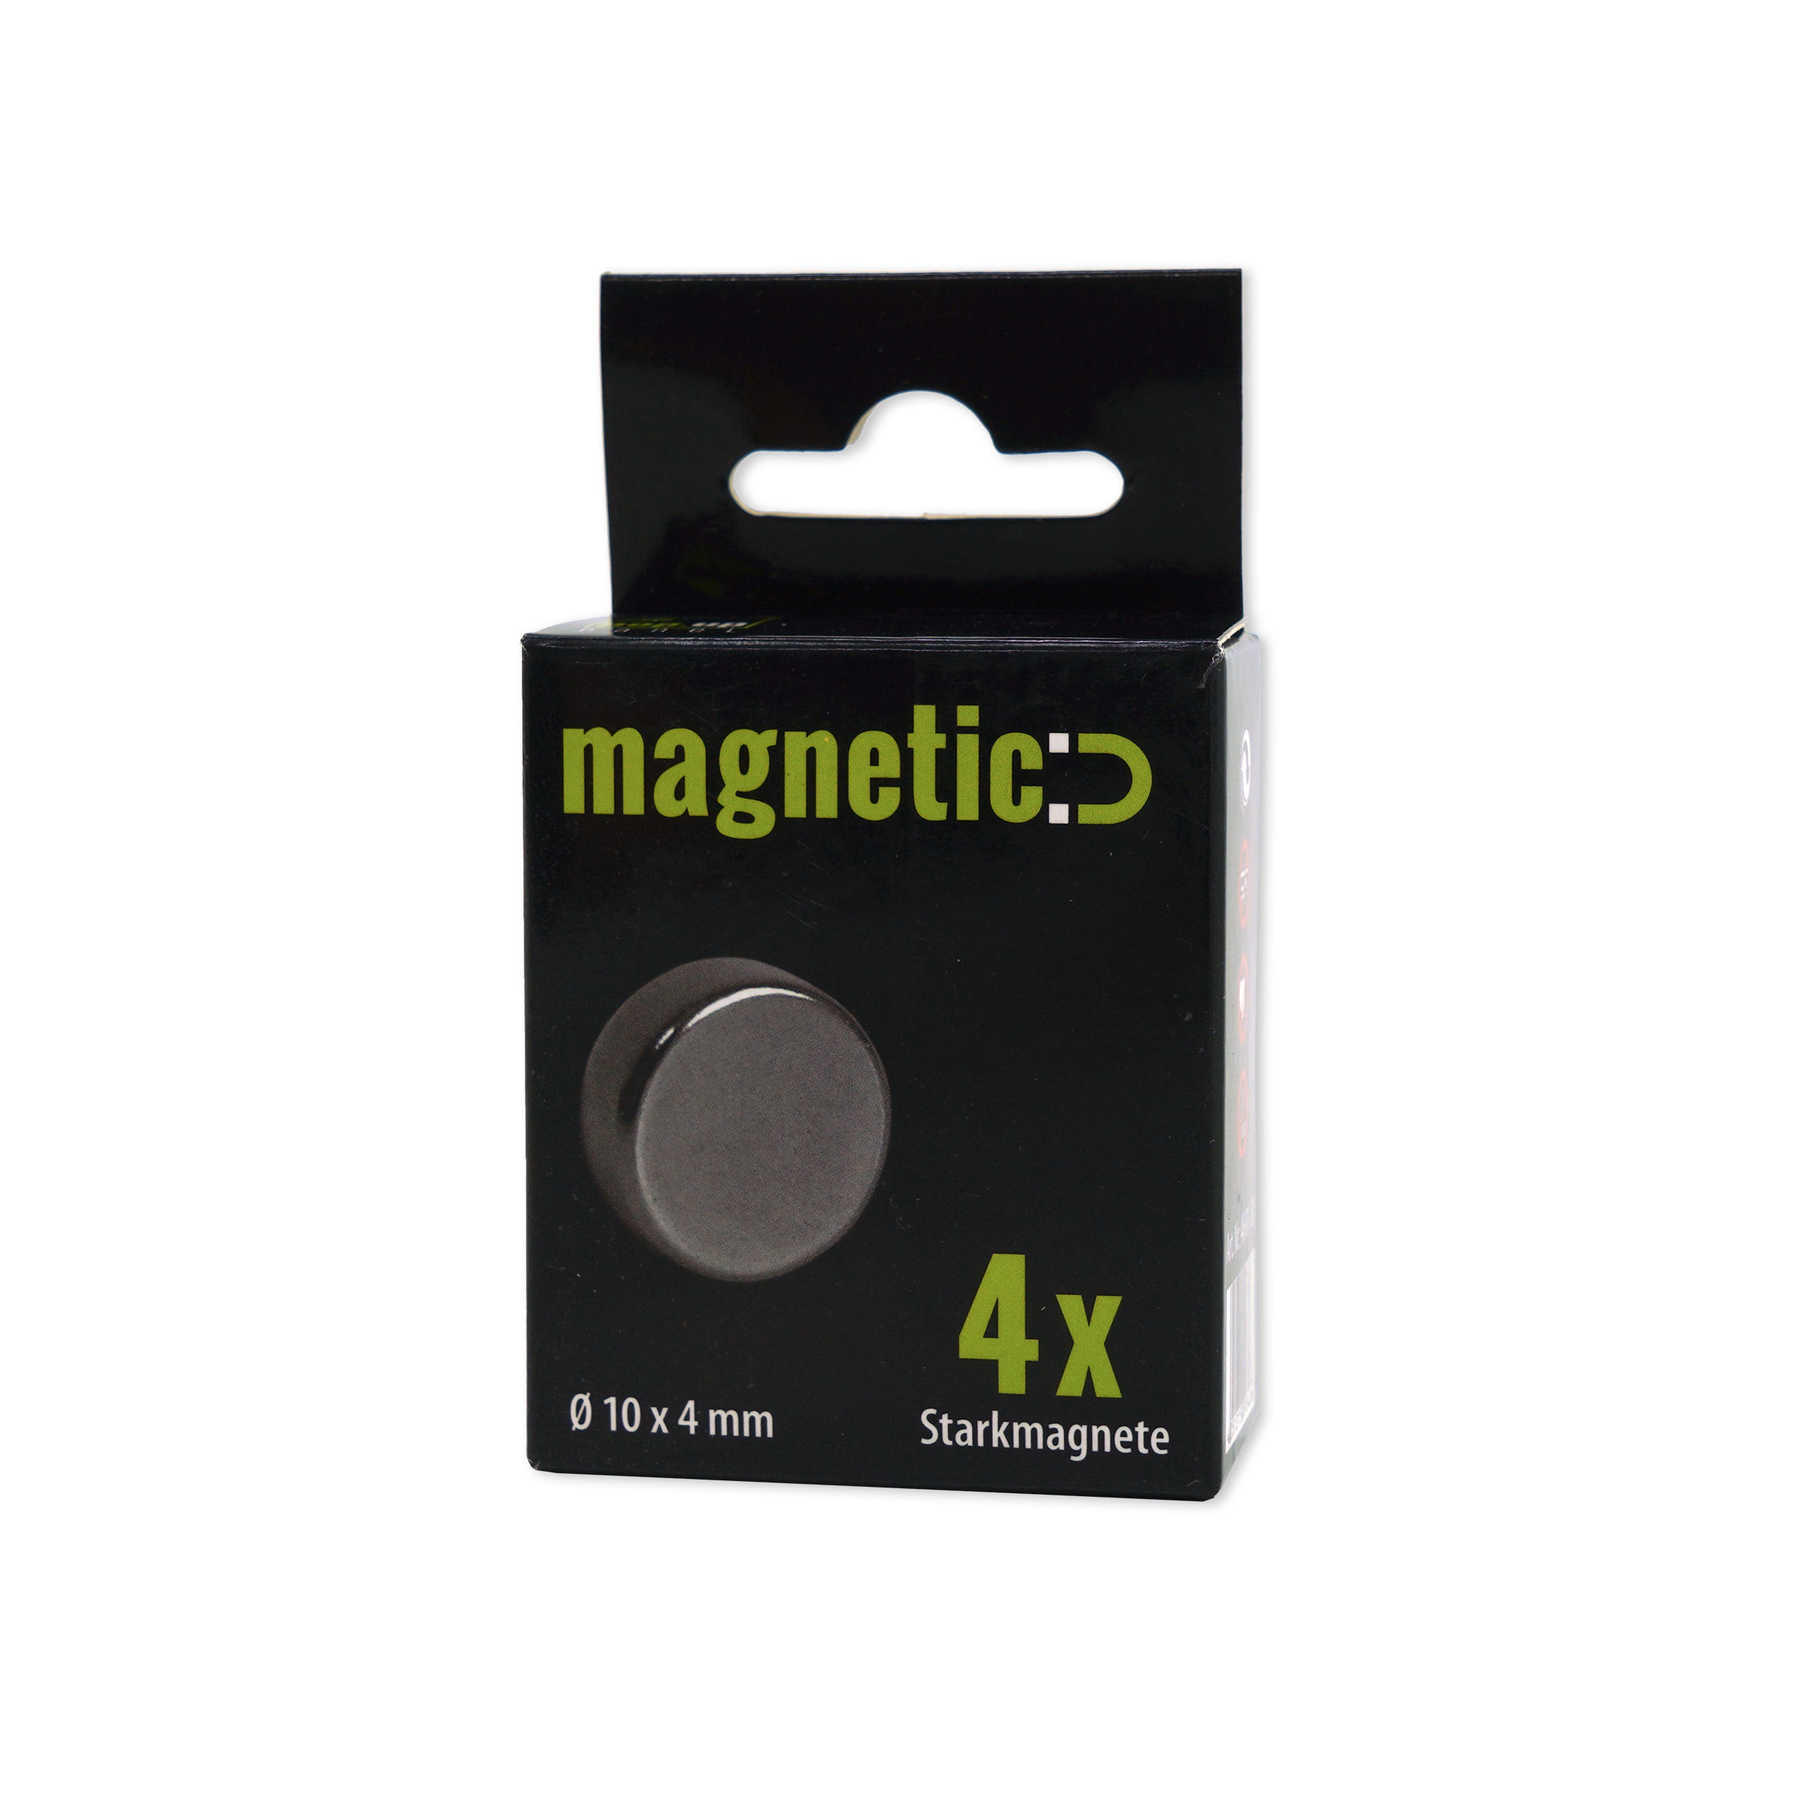             Set of 4 round strong magnets in 10 x 4 mm
        